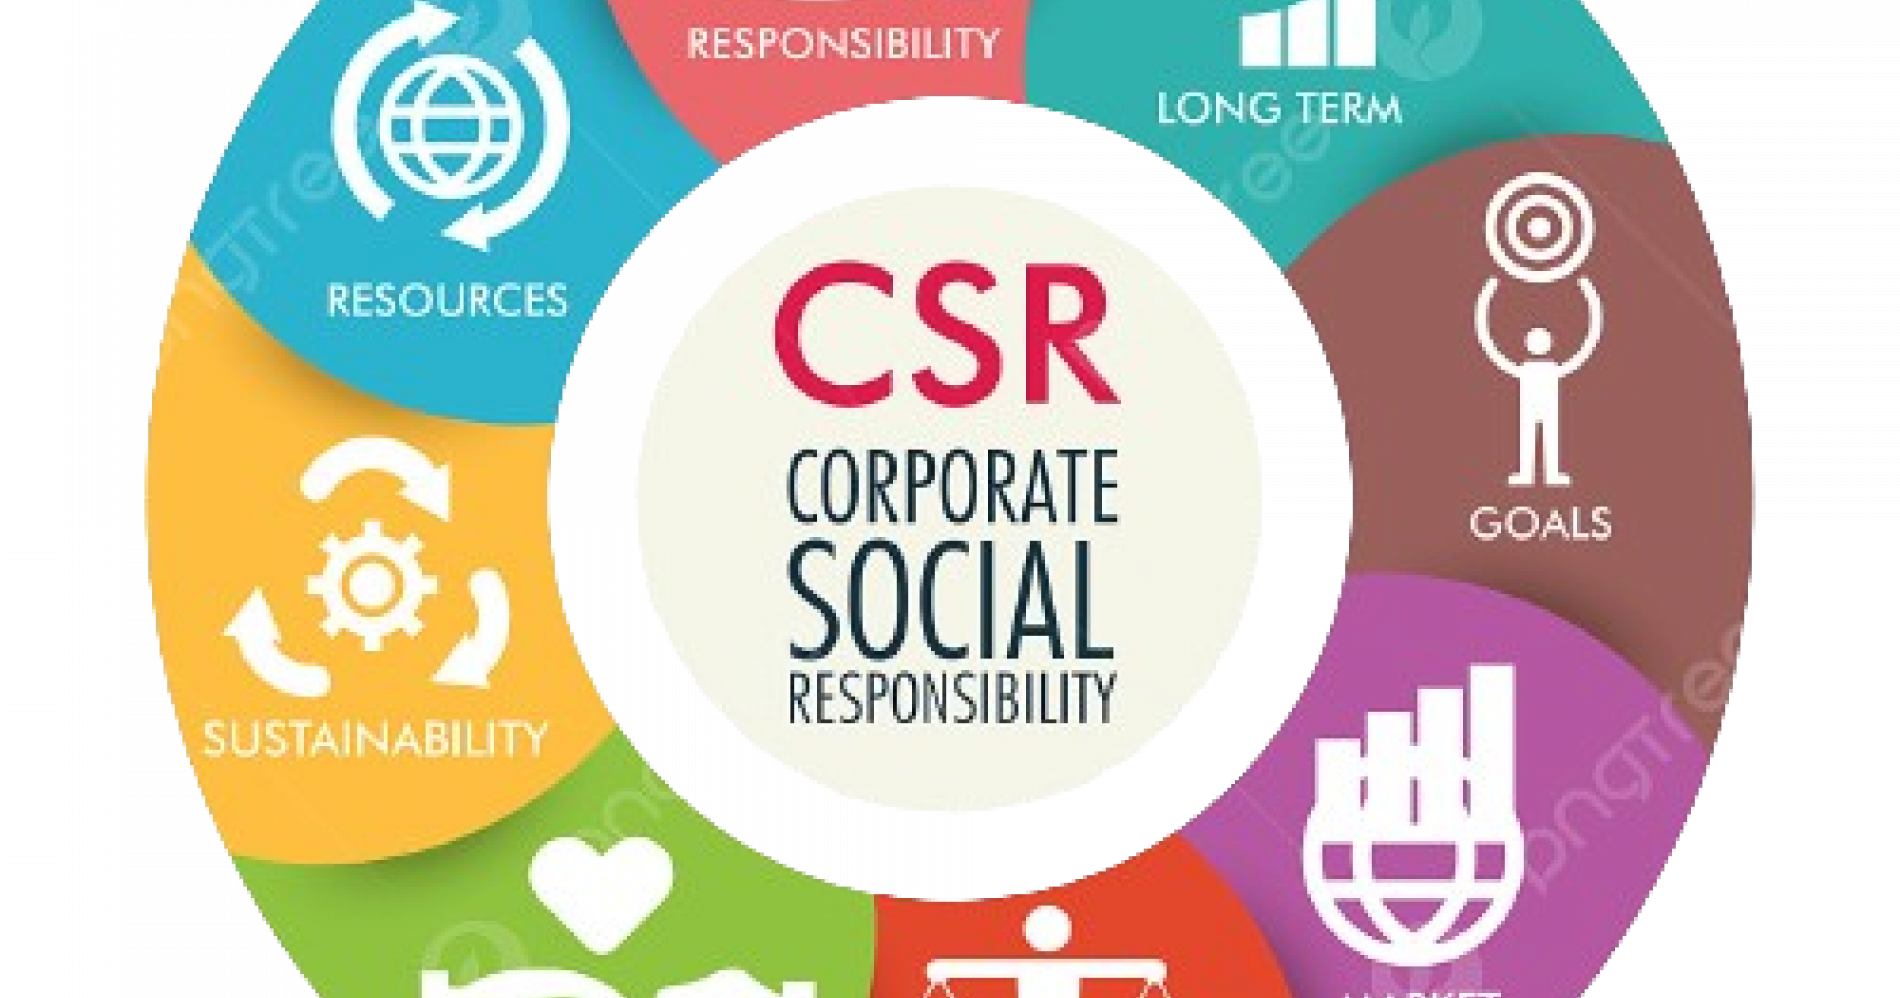 Lingkaran CSR. Sumber : https://id.pngtree.com/freepng/corporate-social-responsibility-csr-infographics-icon-for-business-presentation-economy-growth-poster-png_6295920.html